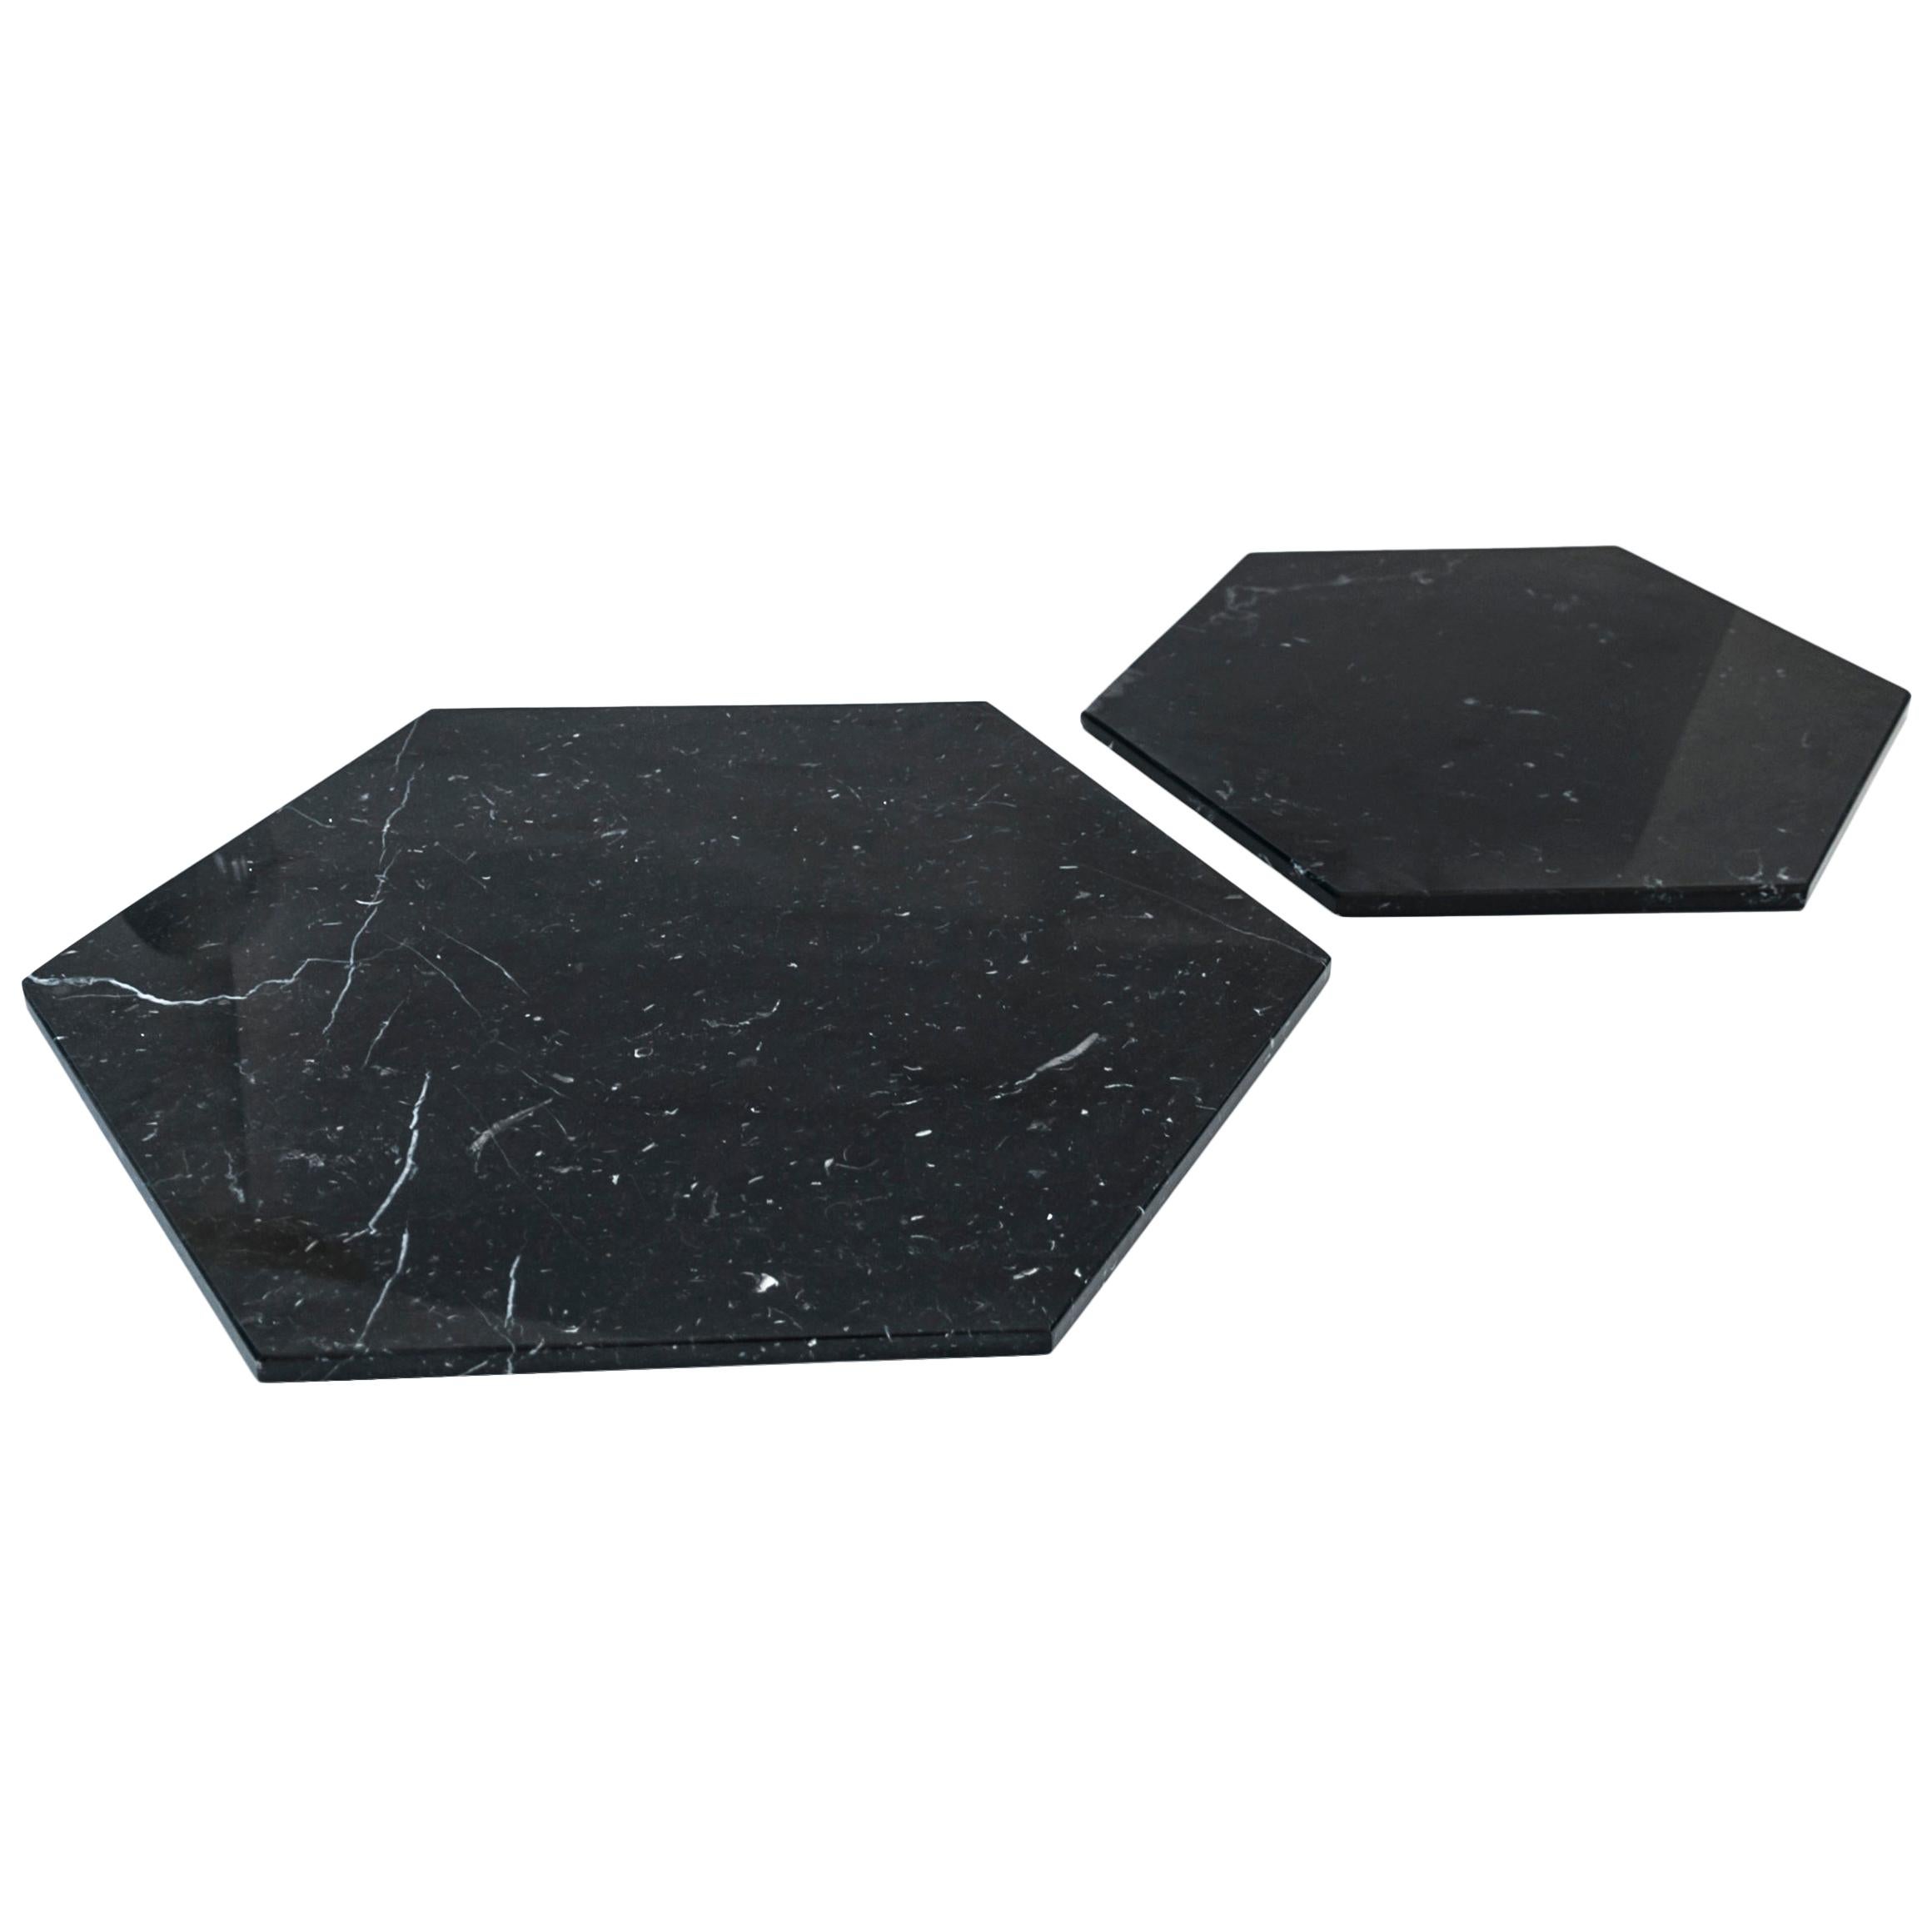 Handmade Set of 2 Hexagonal Black Marquina Marble Plates / Serving Dishes 